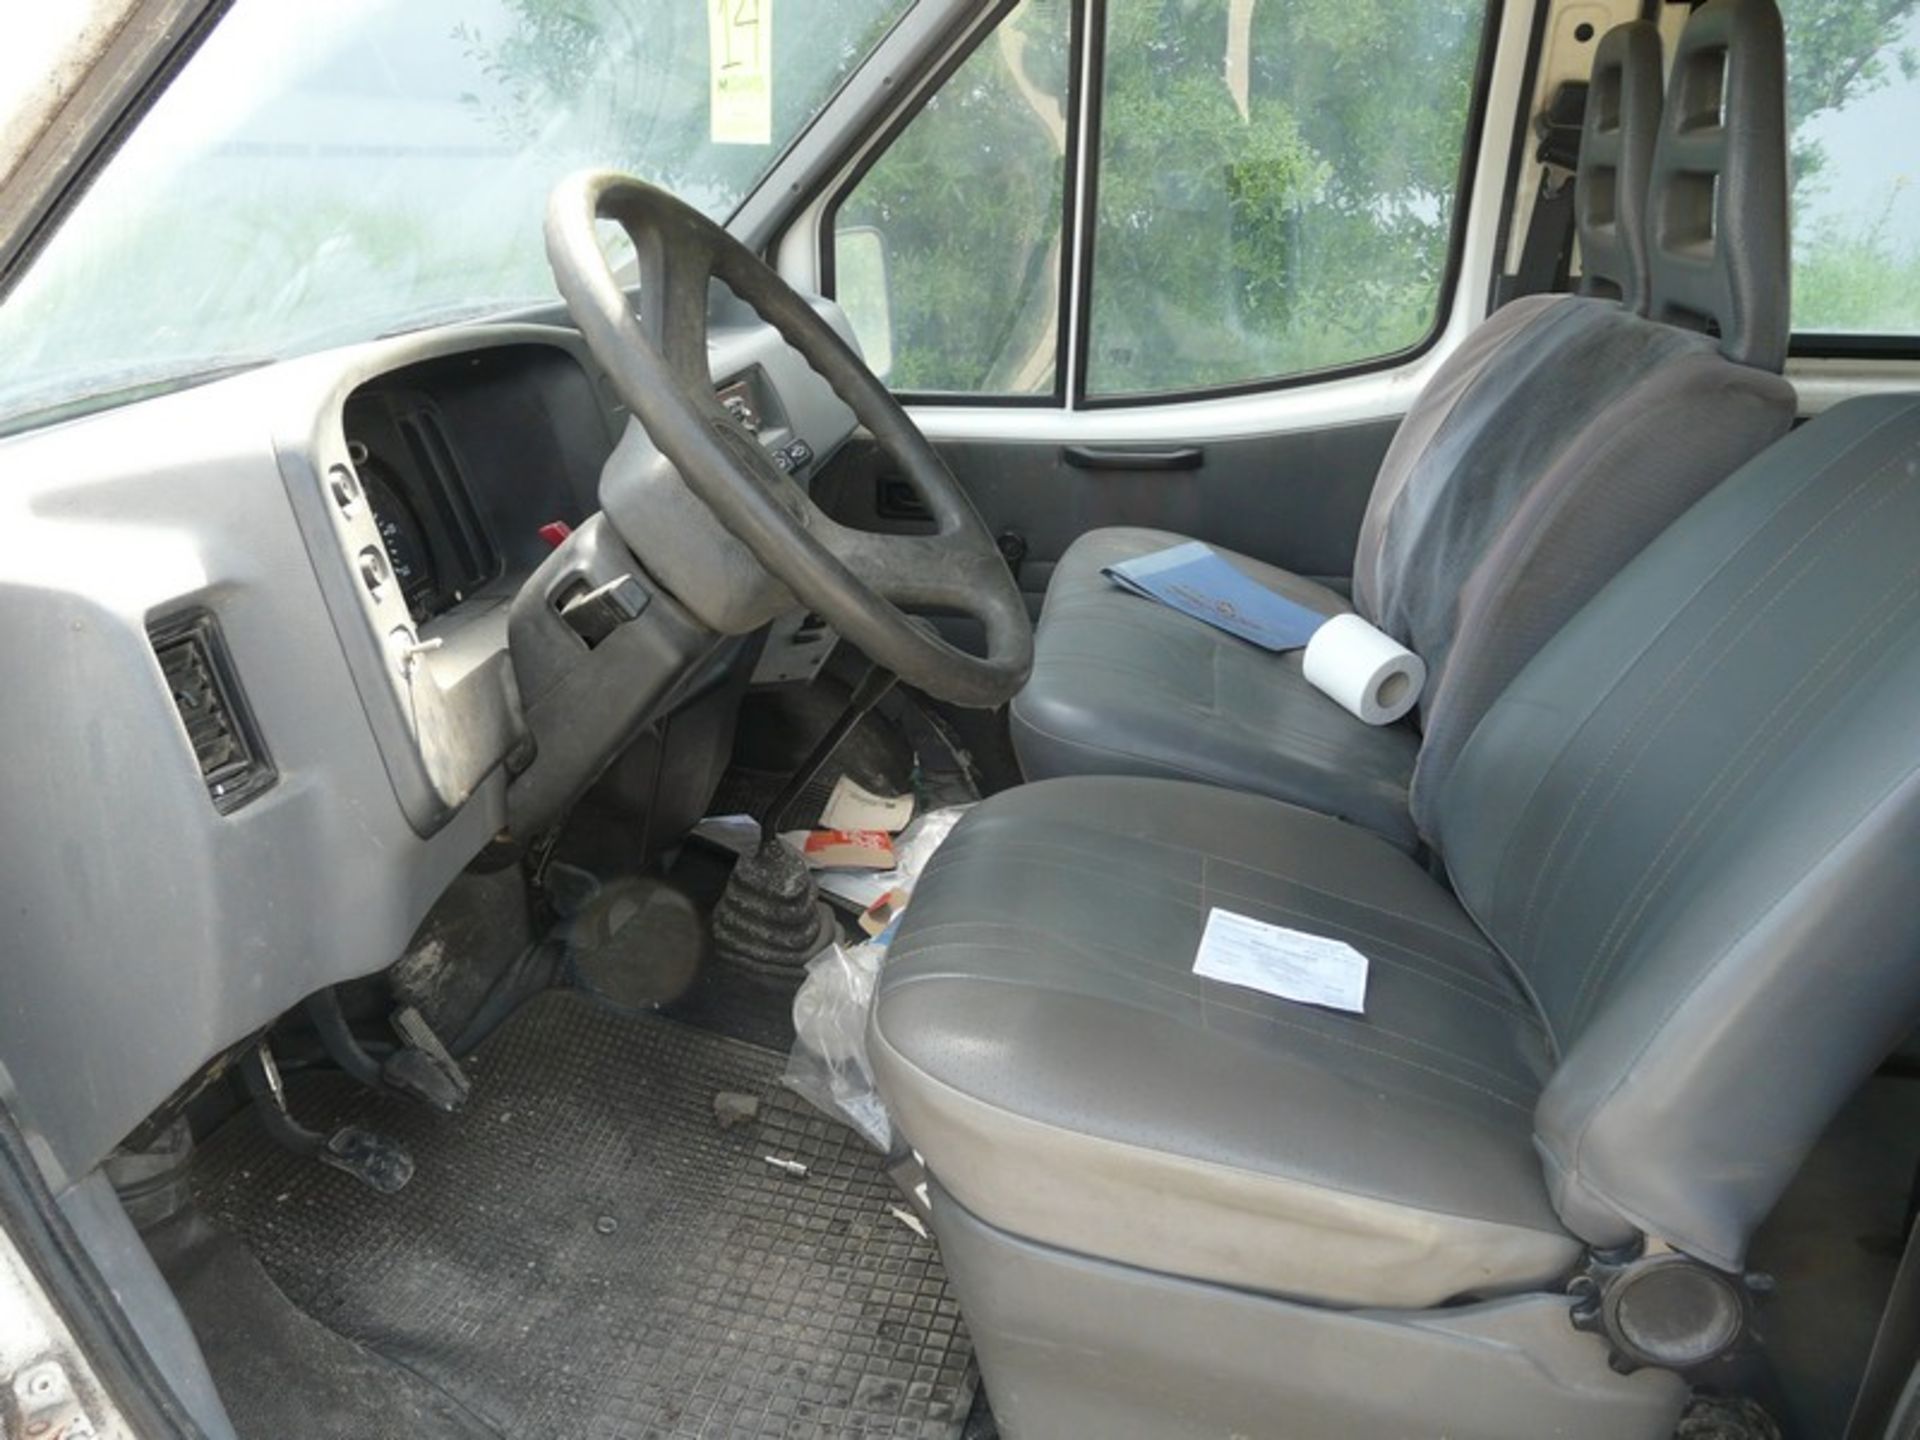 FORD TRANSIT, bus115, diesel, KM 212503, 14+1 seats, REG NBB 8161, Year: 1991 (Located in Greece - - Image 8 of 10